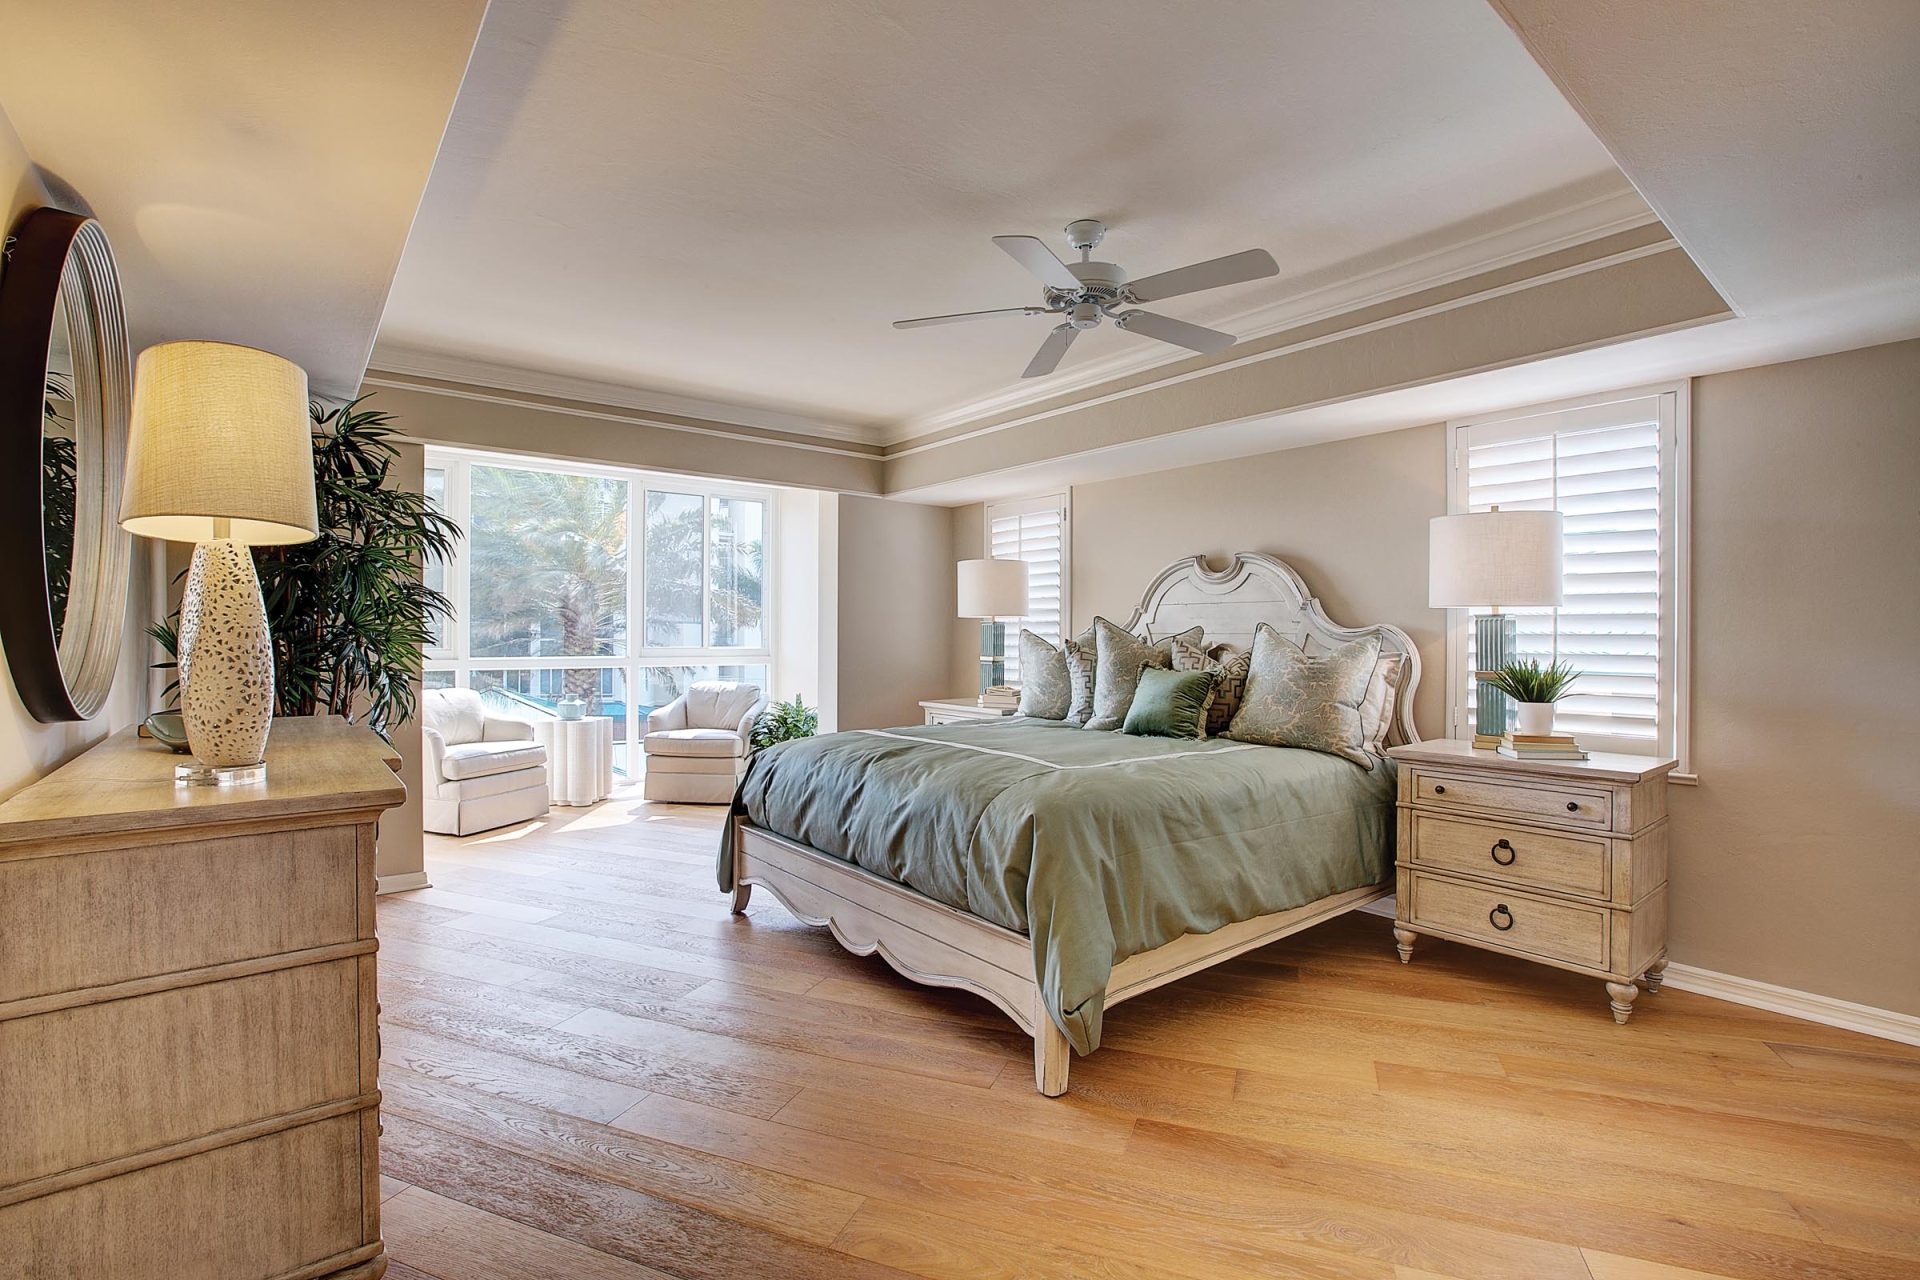 The master bedroom at the Oakmont Model Home at Shell Point Retirement Community